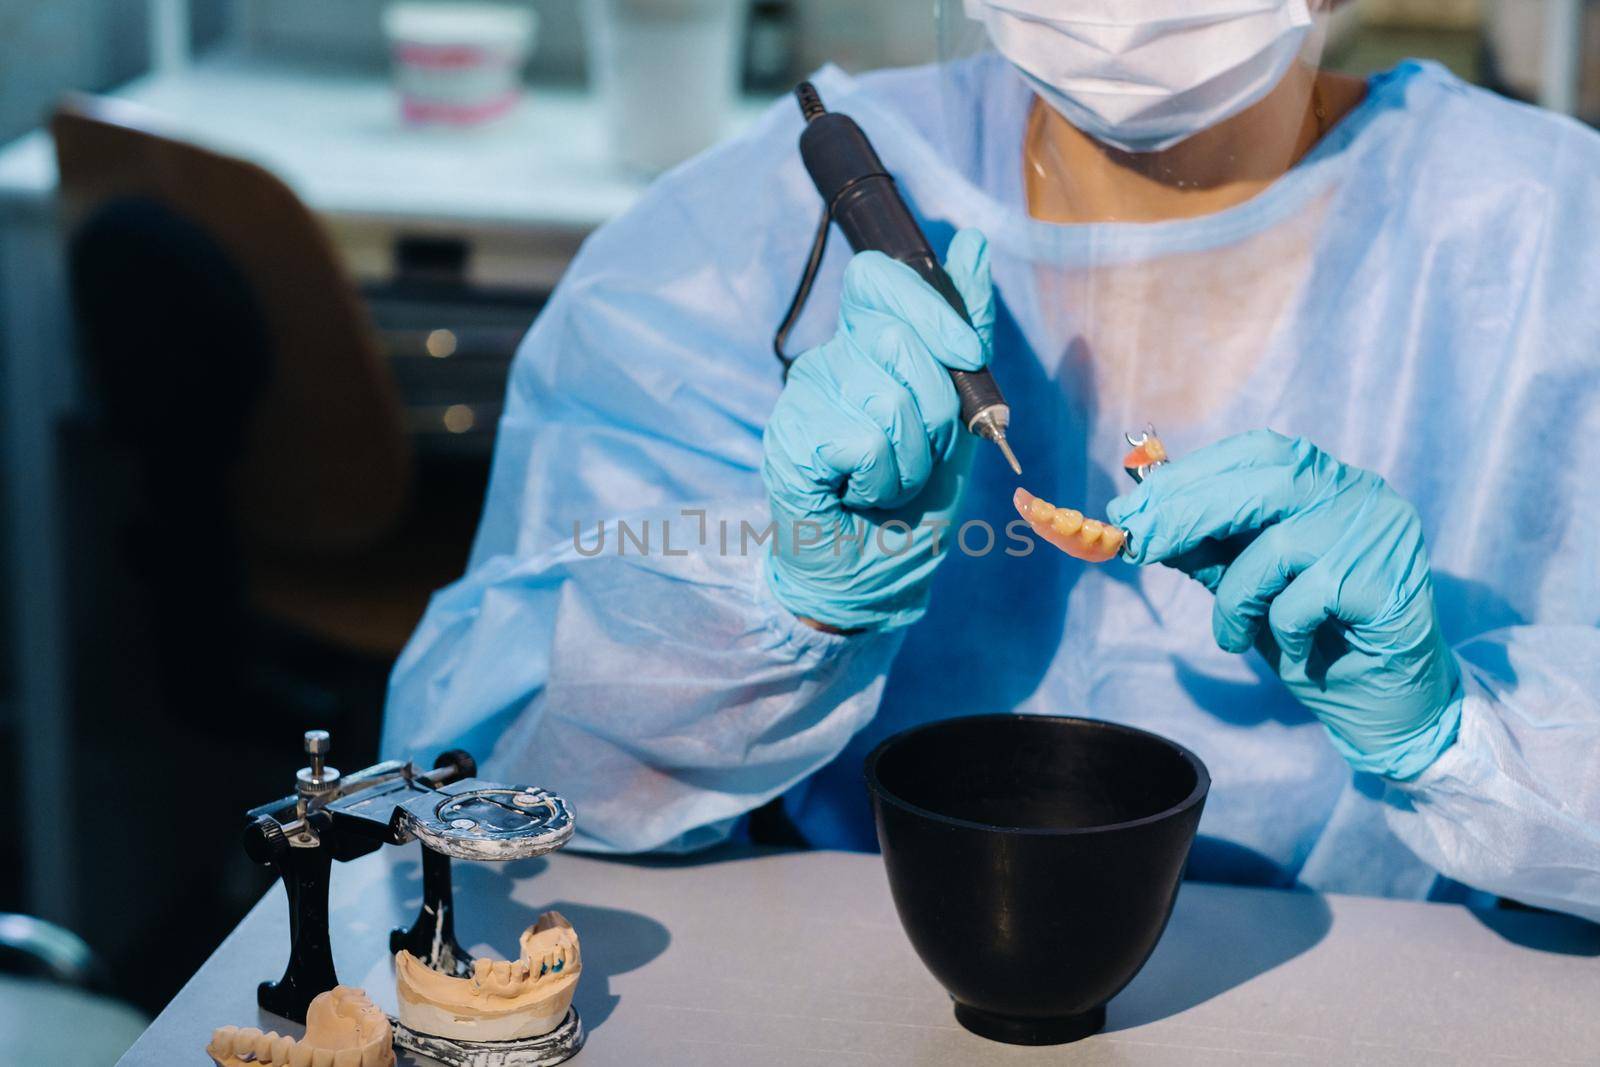 A dental technician in protective clothing is working on a prosthetic tooth in his laboratory.